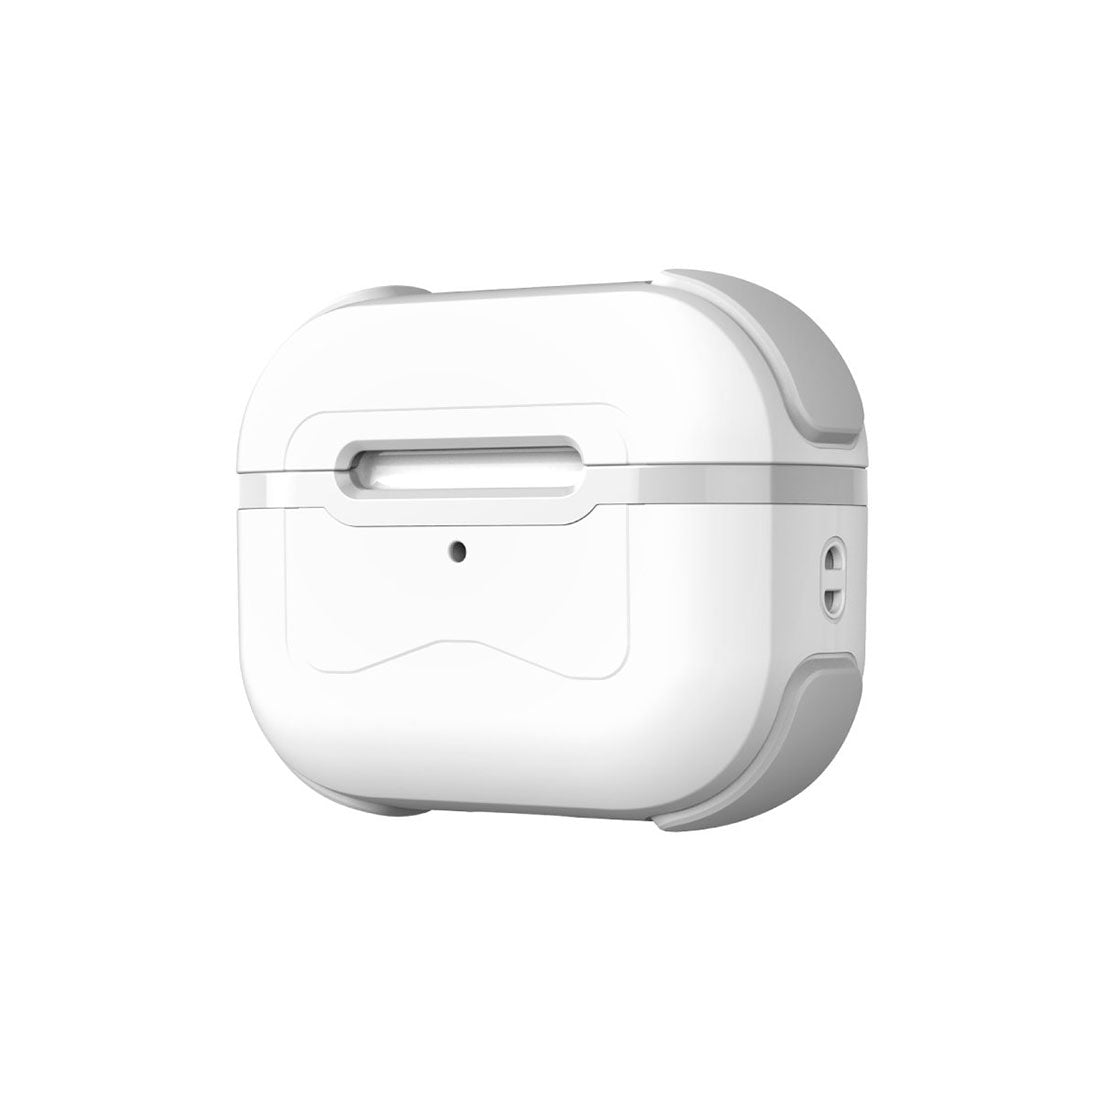 POCKET for AirPods Pro 抗菌・耐衝撃ケース